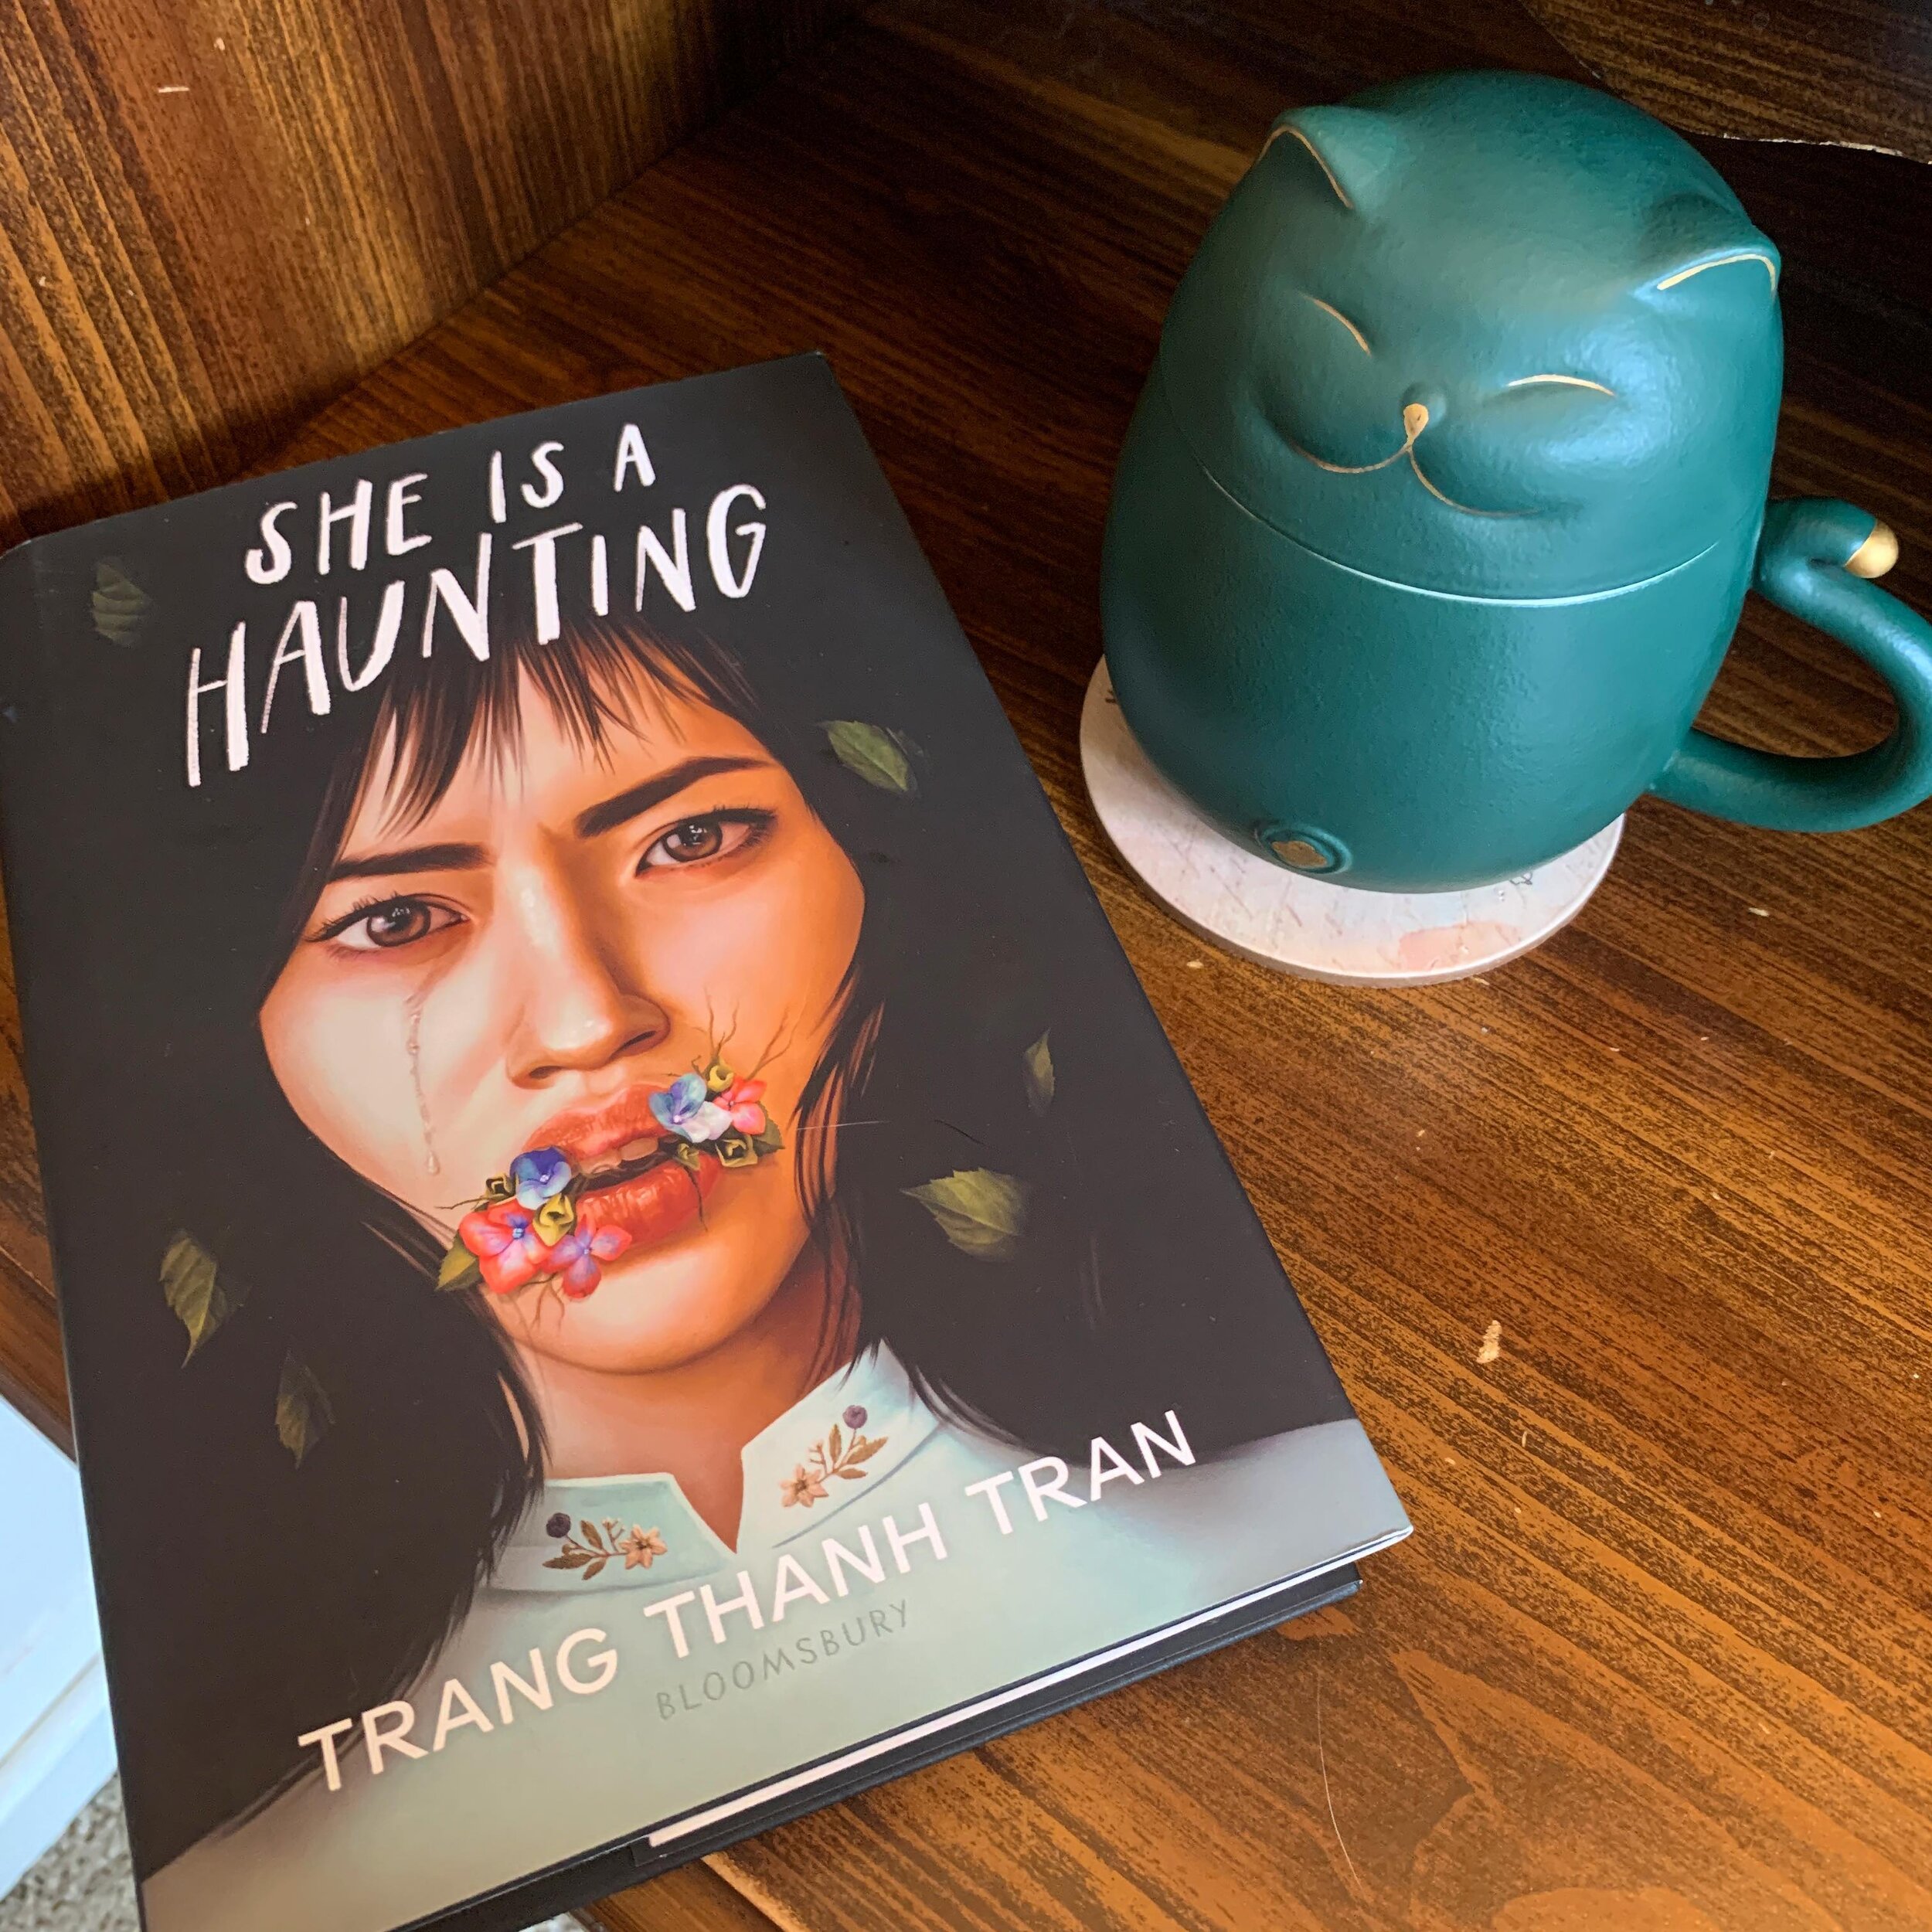 Thrilled to share our March Book Pick with y&rsquo;all: SHE IS A HAUNTING 🏡🐛

I&rsquo;ve had this one on my list from before it was released and I can&rsquo;t wait to talk about this chilling book with members. I&rsquo;m already 130 pages in and it